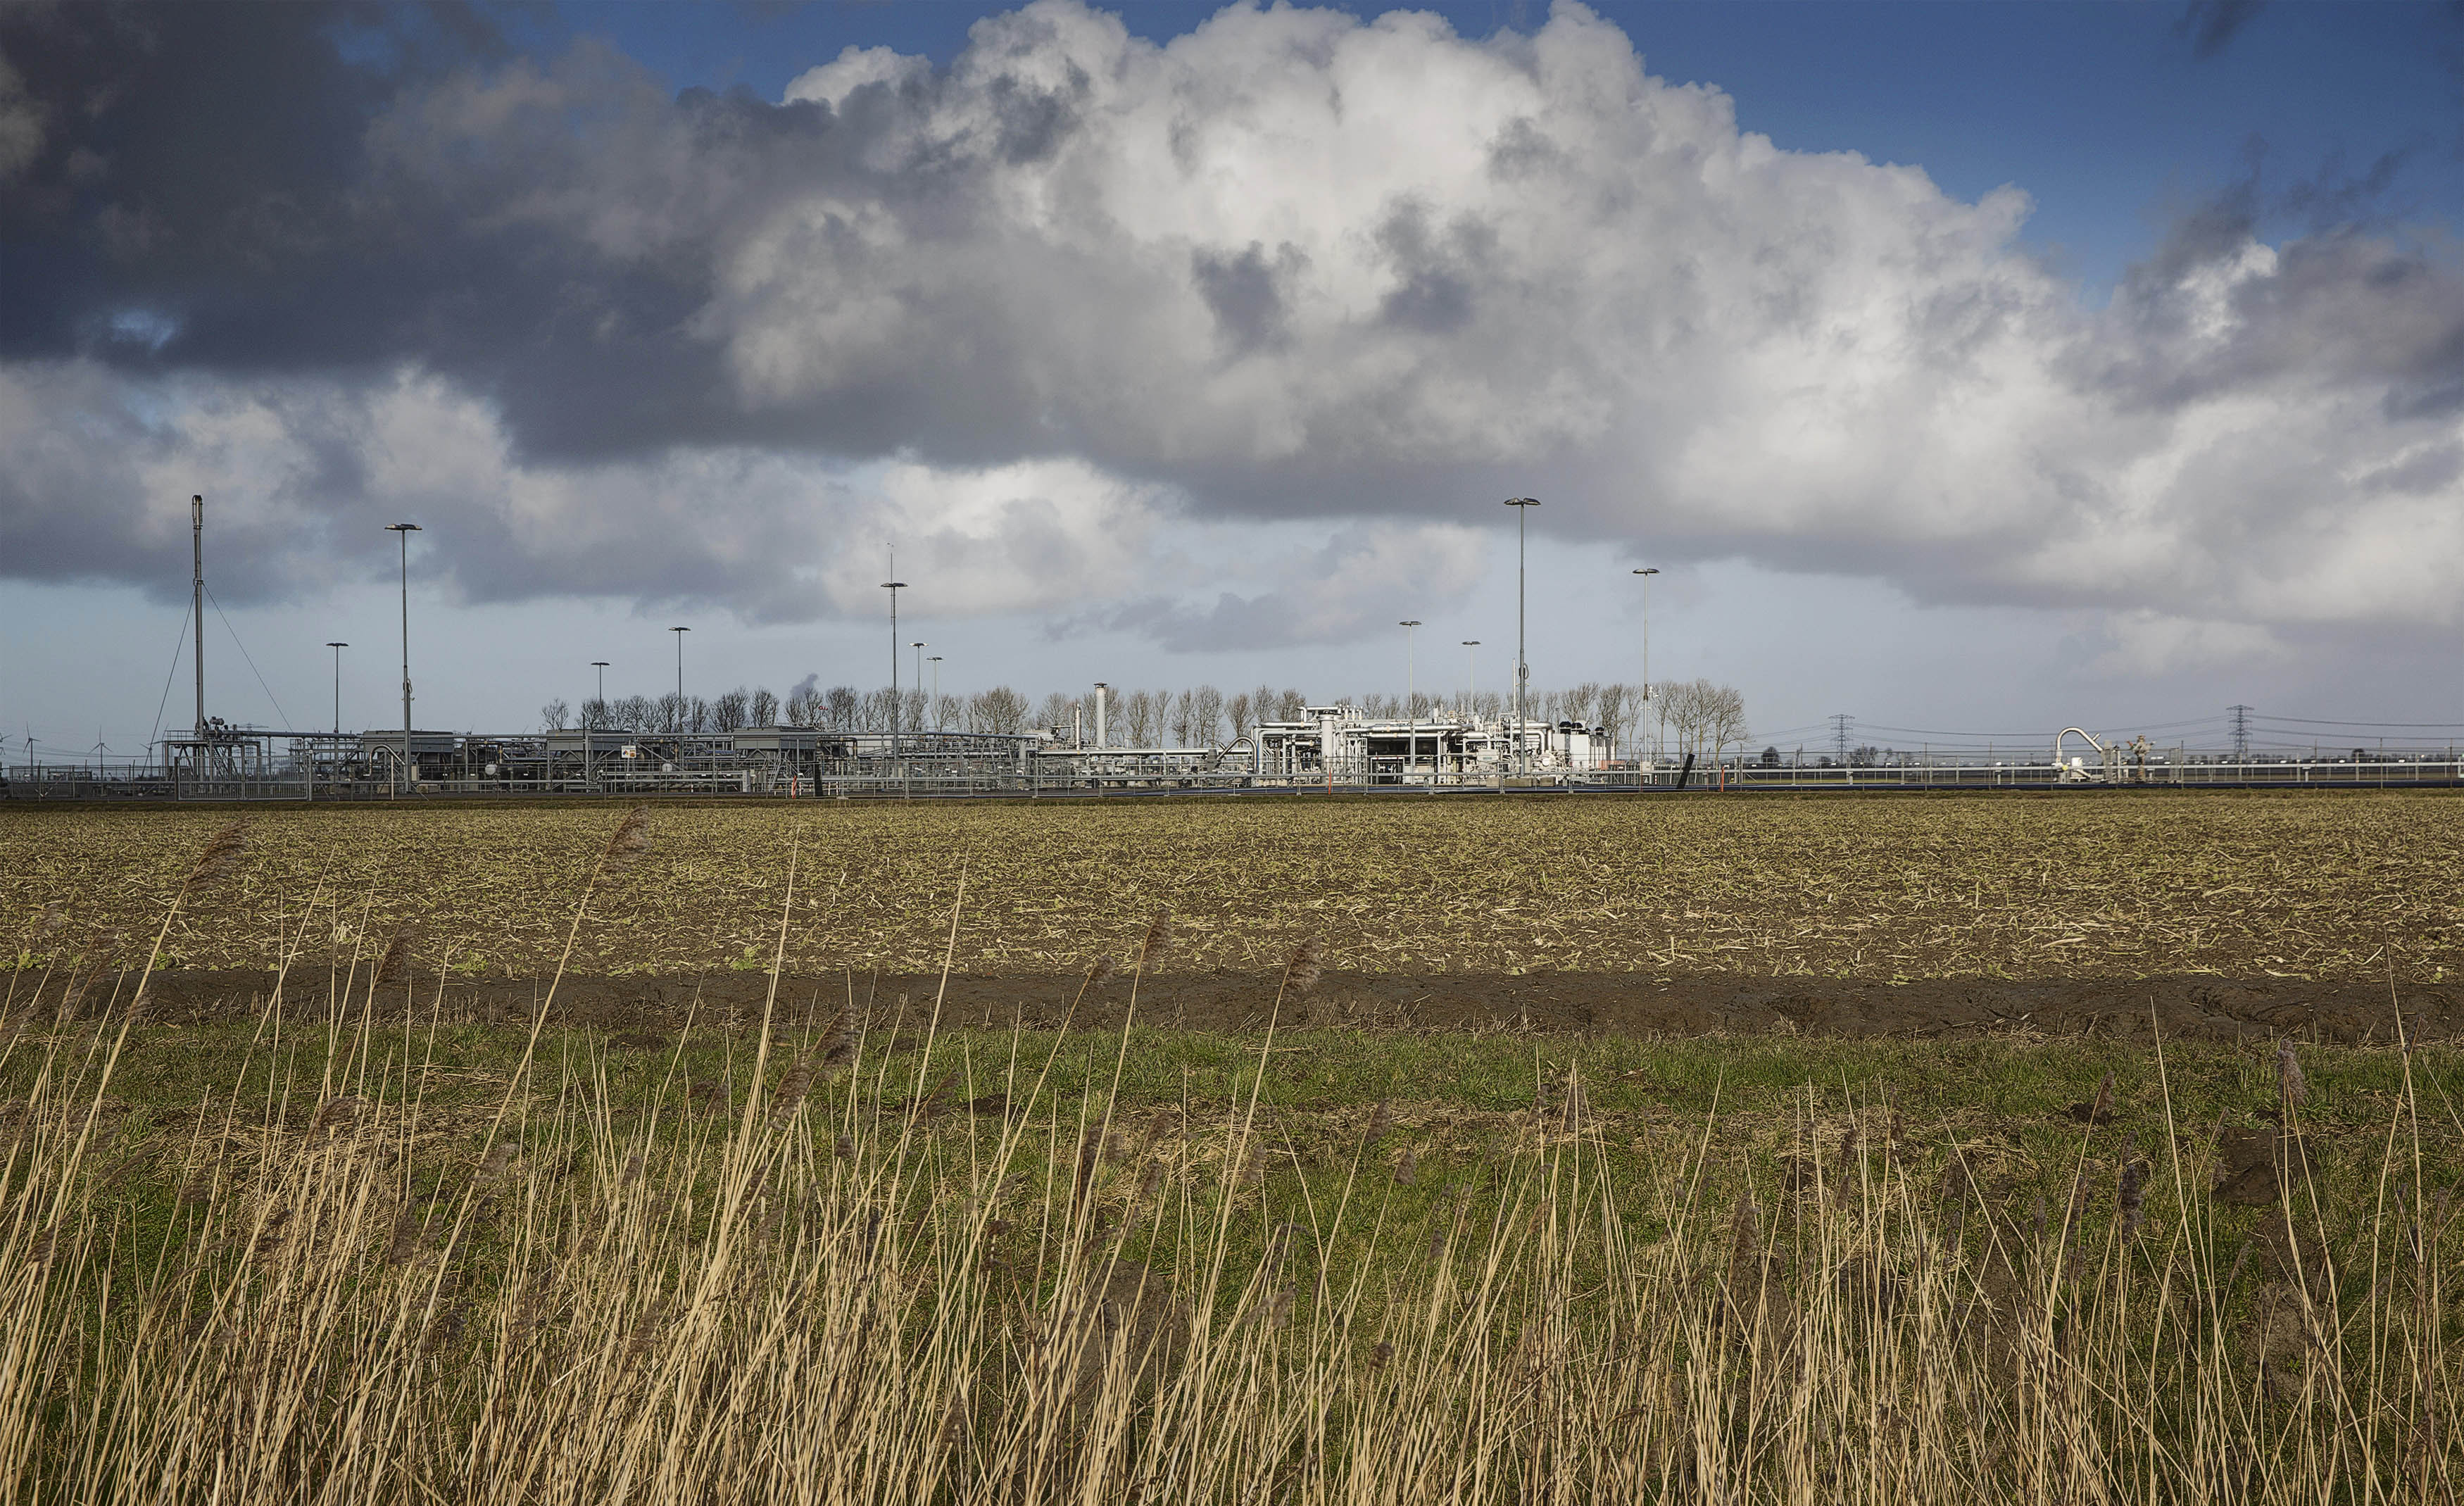 A view of a gas production plant is seen in 't Zand in Groningen